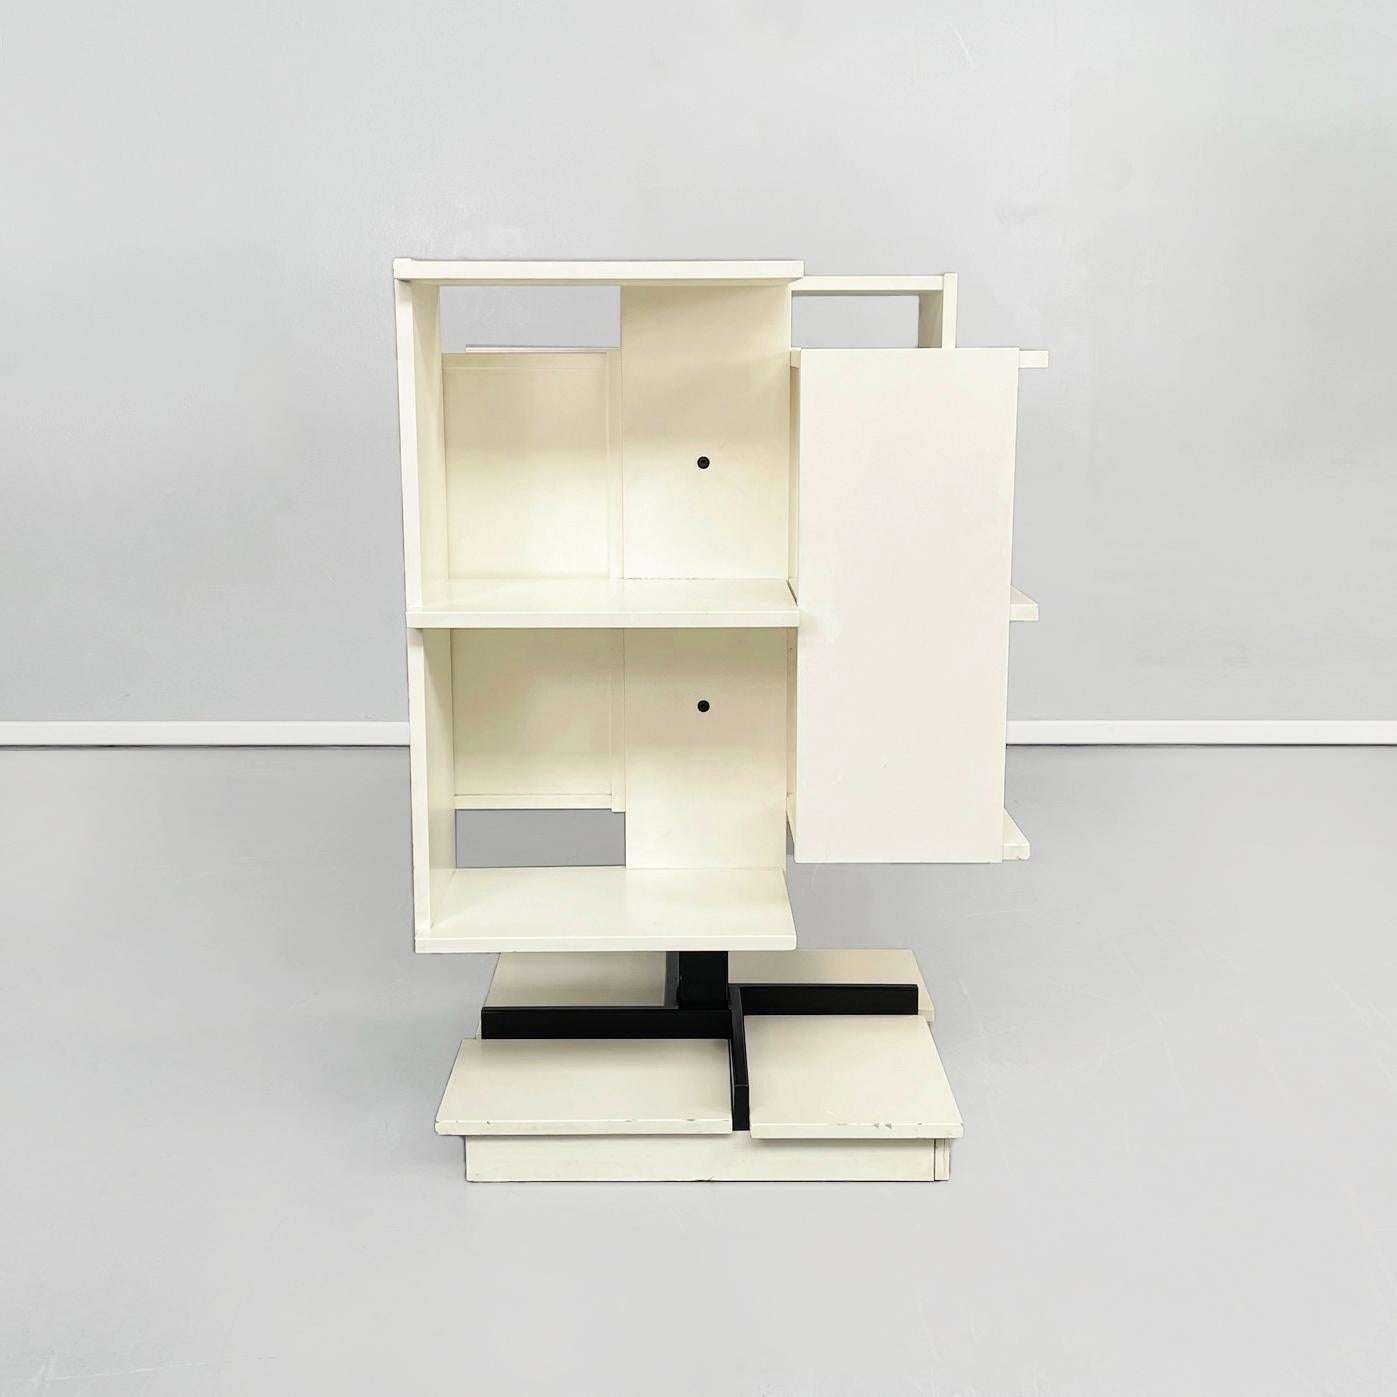 Italian mid-century wooden modular revolving bookcase by Salocchi for Sormani, 1960s.
Modular revolving bookcase in white painted wooden chipboard. The bookcase has 4 compartments, each equipped with 2 shelves and a single compartment has the door.